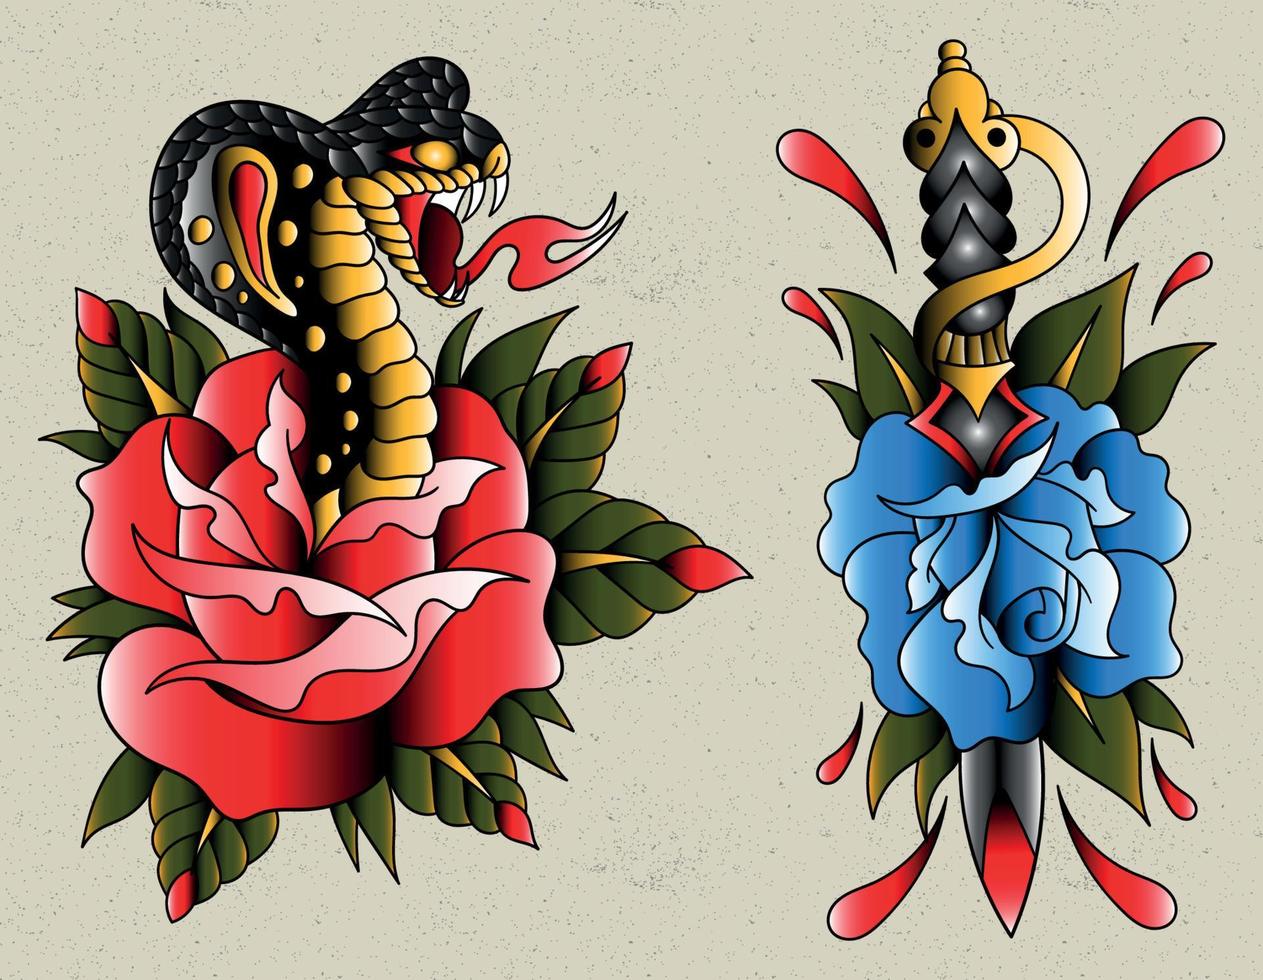 cobra and rose an dagger rose traditional tattoo vector